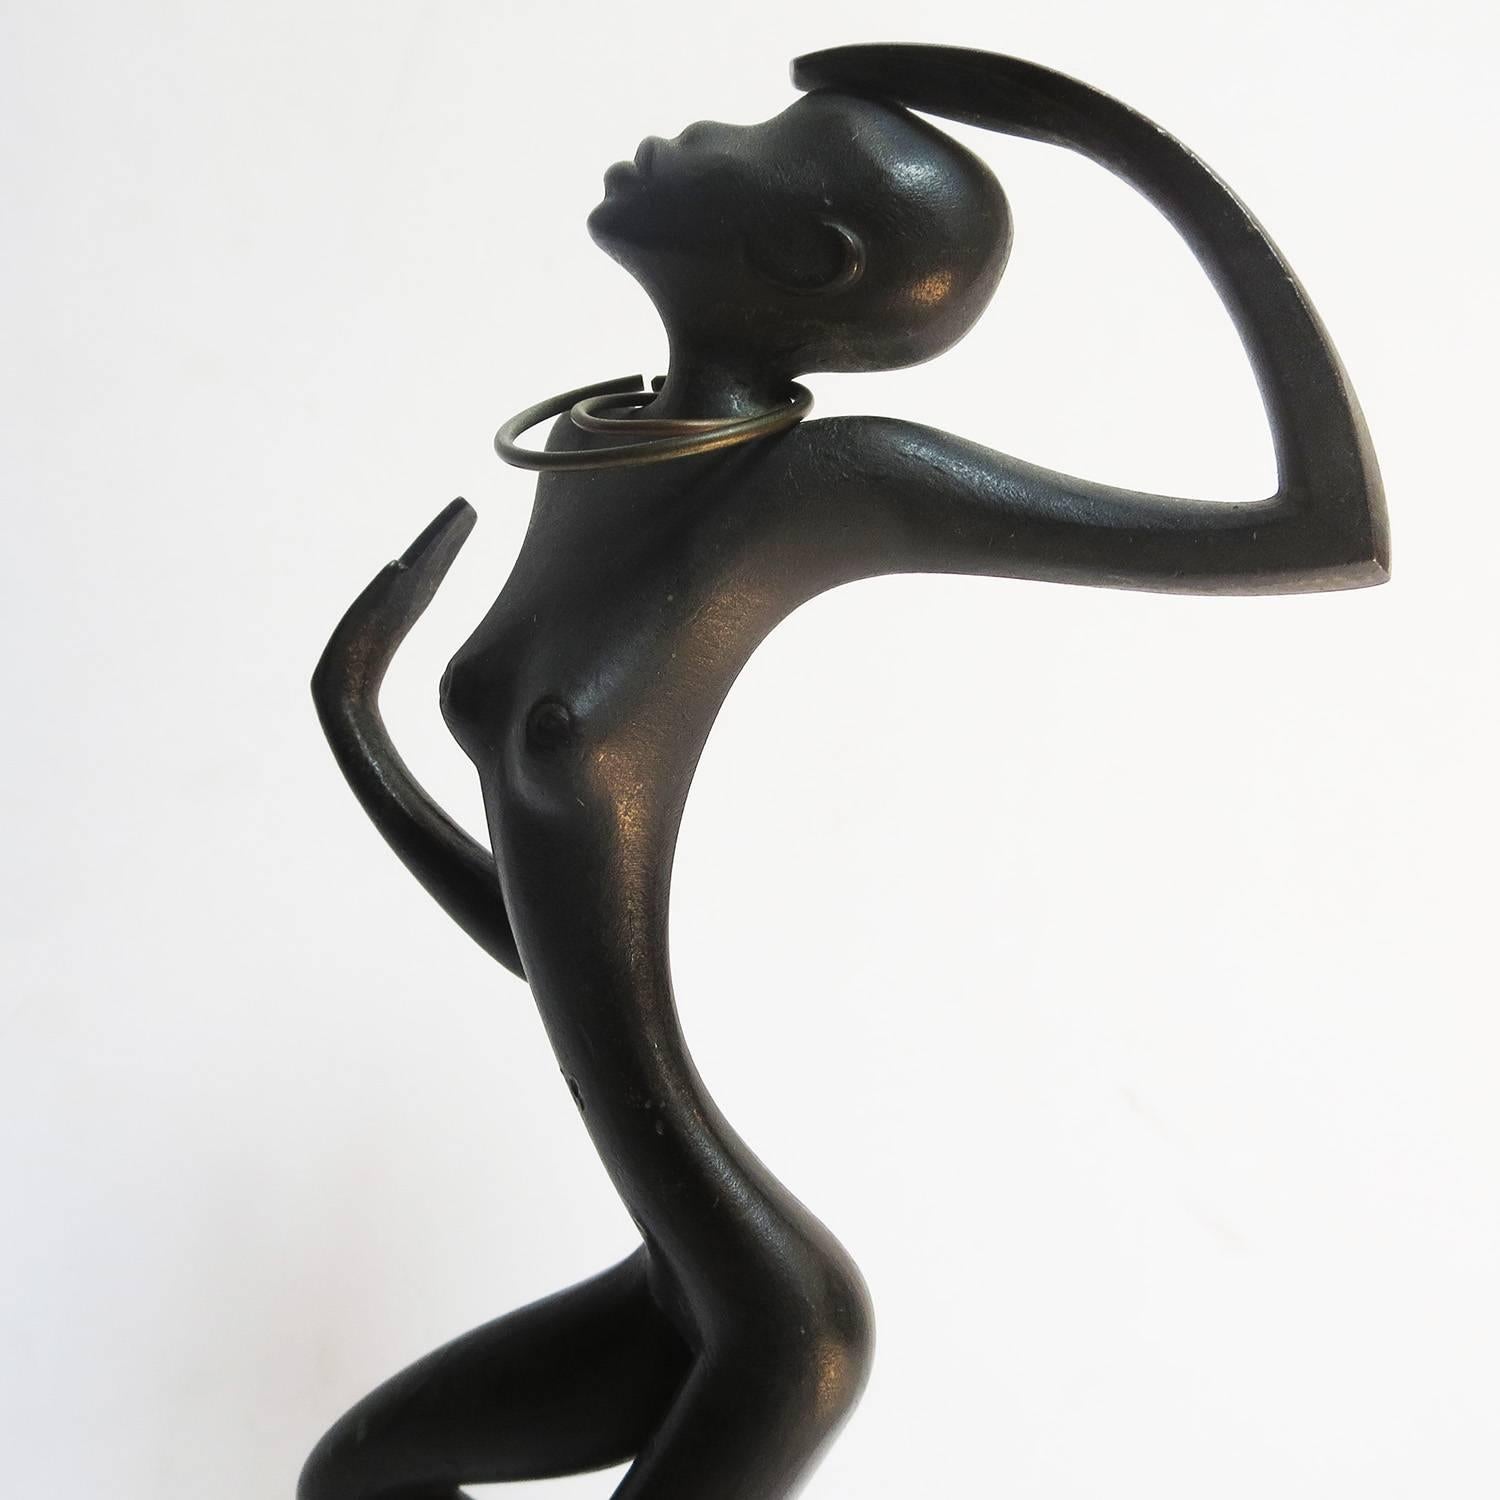 This streamlined figure is from the 